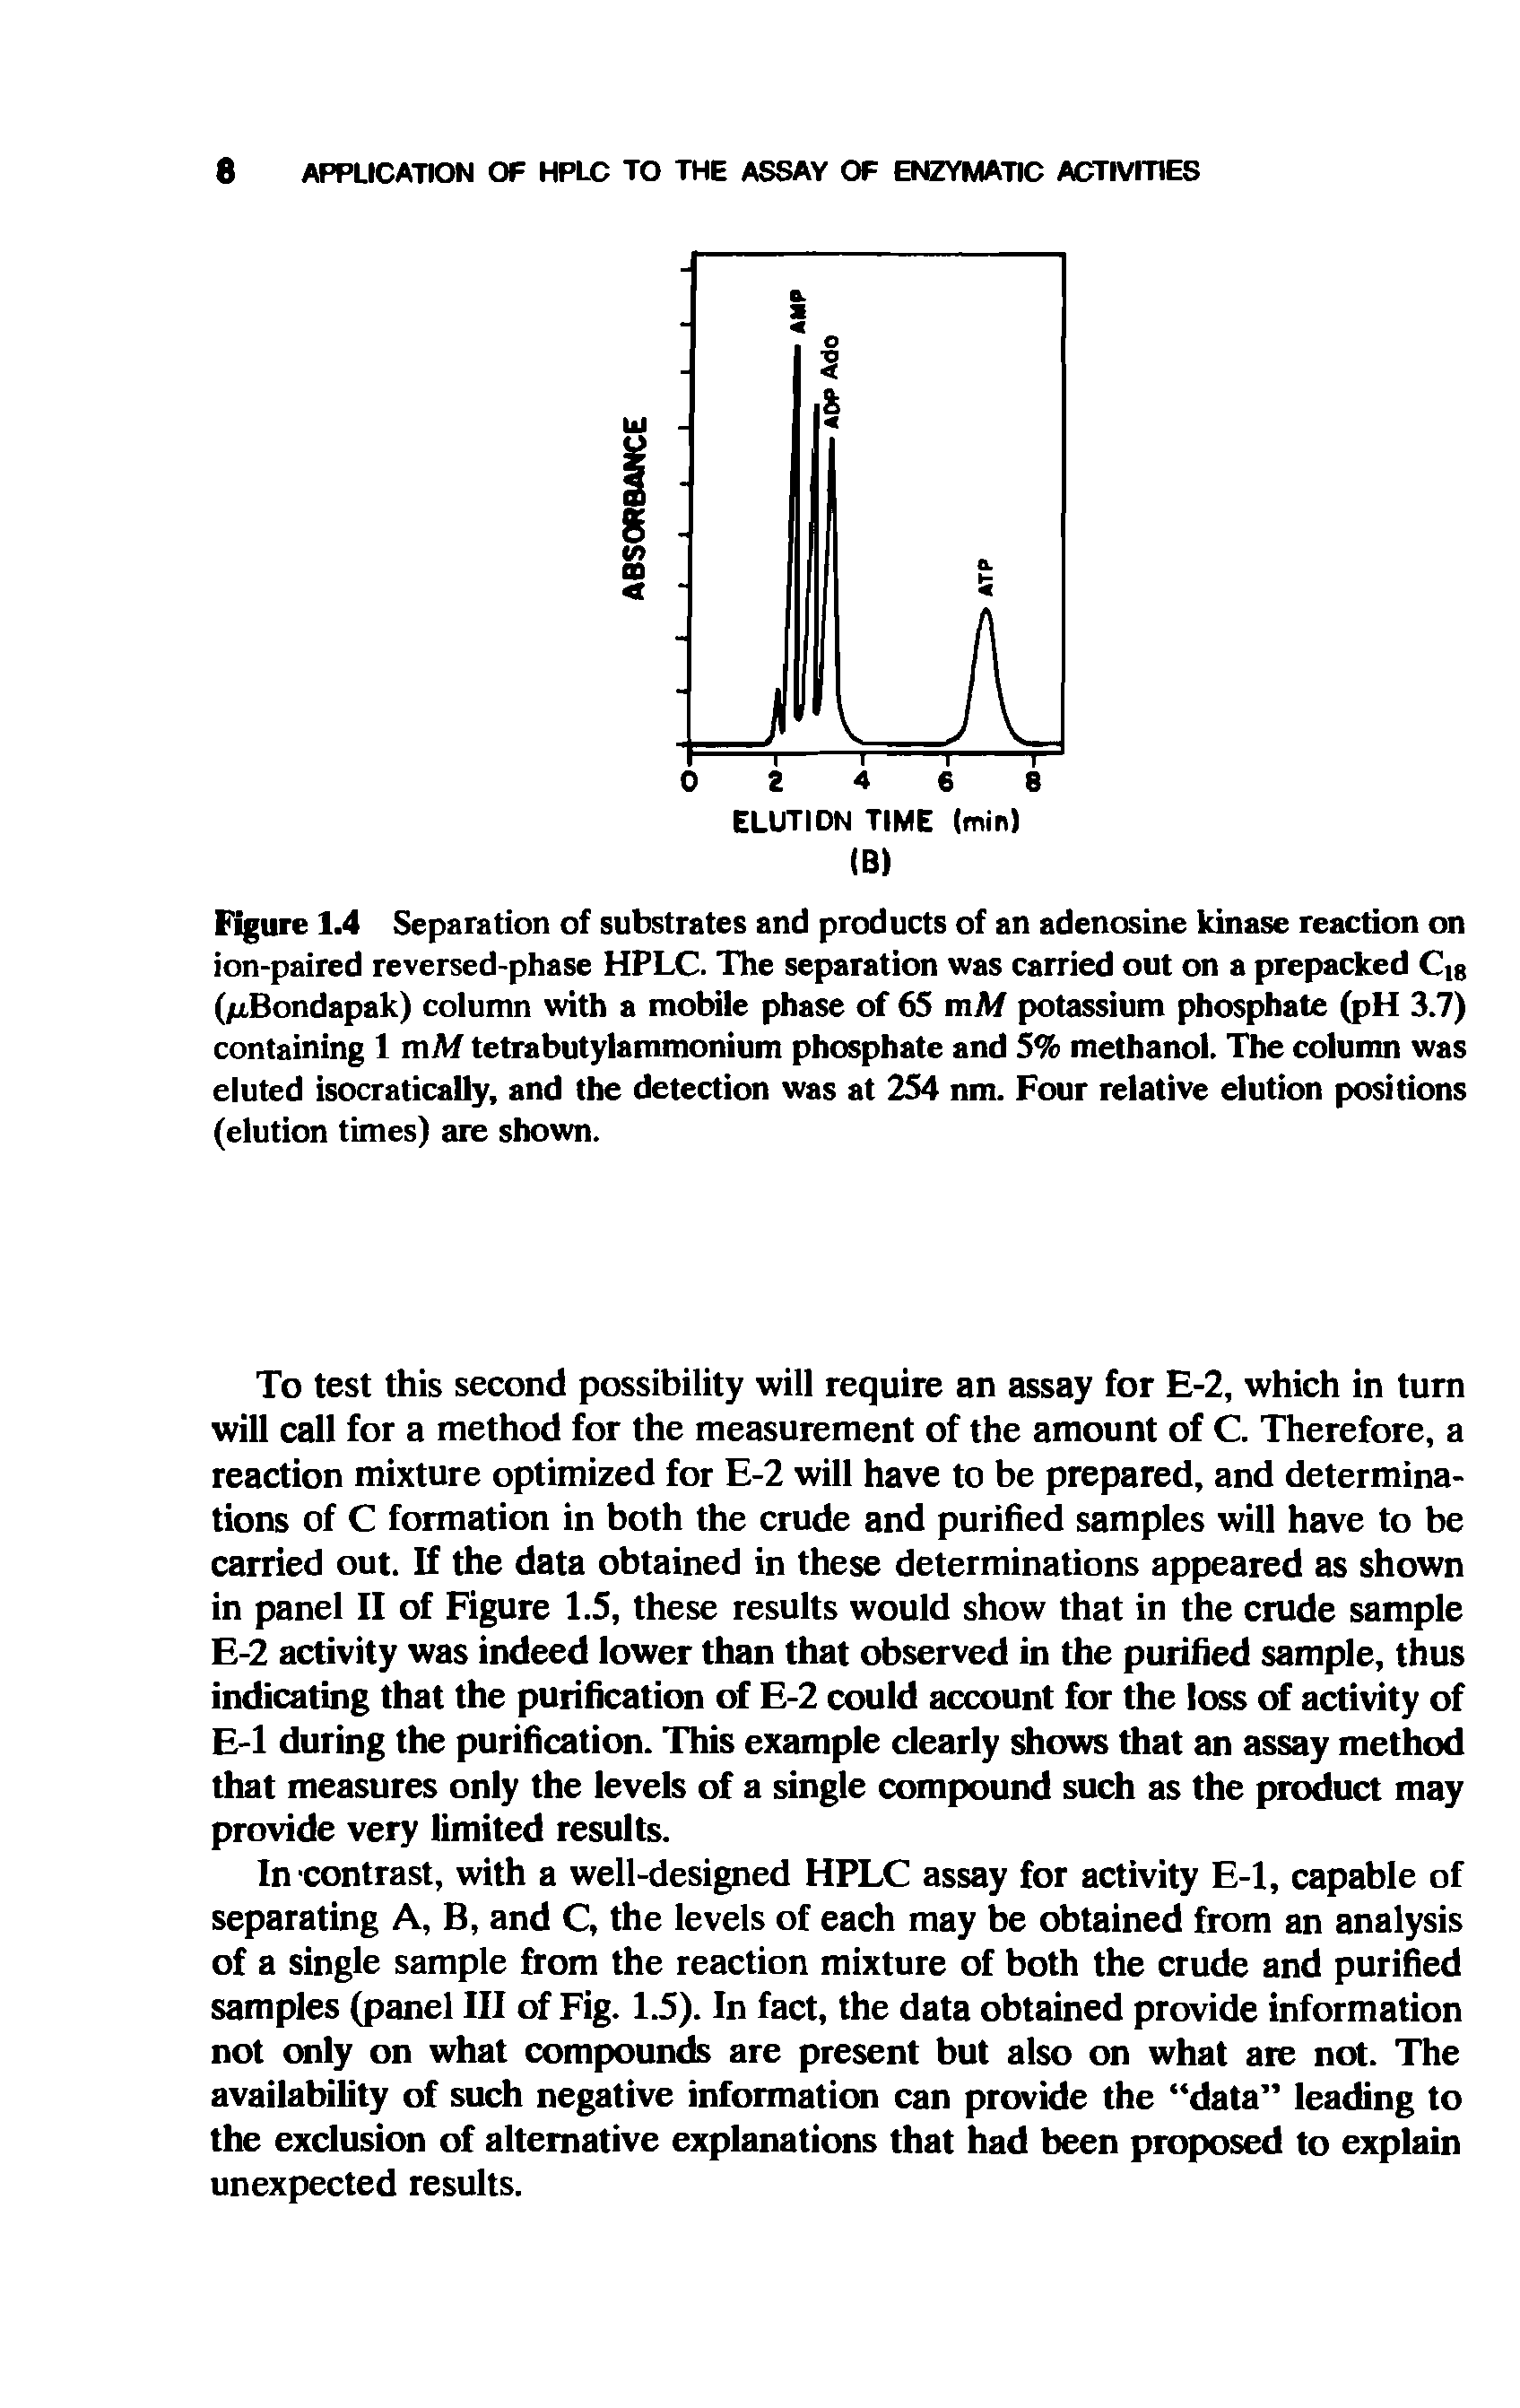 Figure 1.4 Separation of substrates and products of an adenosine kinase reaction on ion-paired reversed-phase HPLC. The separation was carried out on a prepacked Ctg (/xBondapak) column with a mobile phase of 65 mAf potassium phosphate (pH 3.7) containing 1 mAf tetrabutylammonium phosphate and 5% methanol. The column was eluted isocratically, and the detection was at 254 nm. Four relative elution positions (elution times) arc shown.